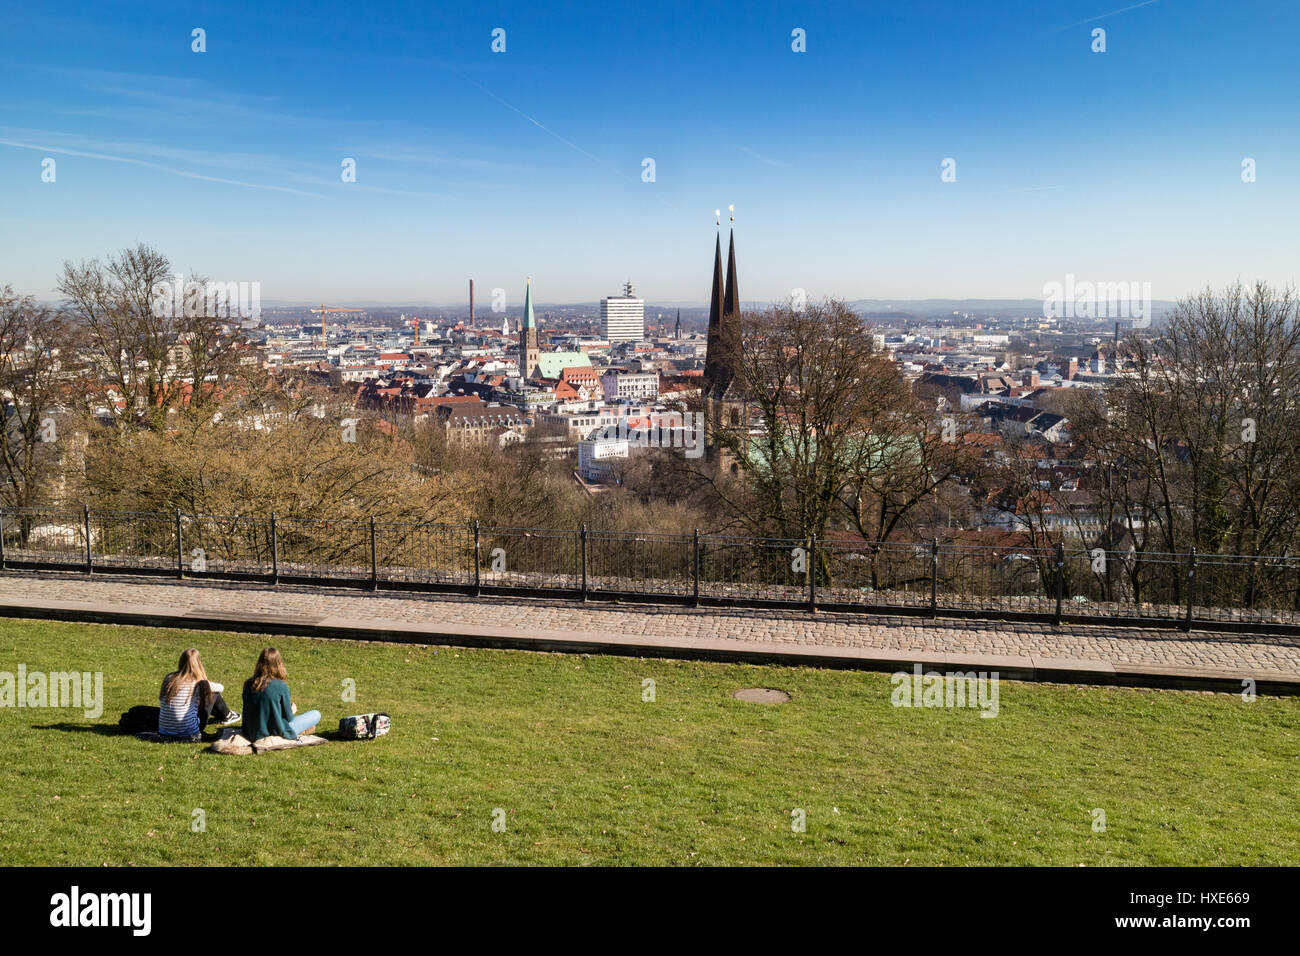 Two women relax in the spring sunshine at Sparrenburg, Bielefeld, Germany, overlooking the city Stock Photo